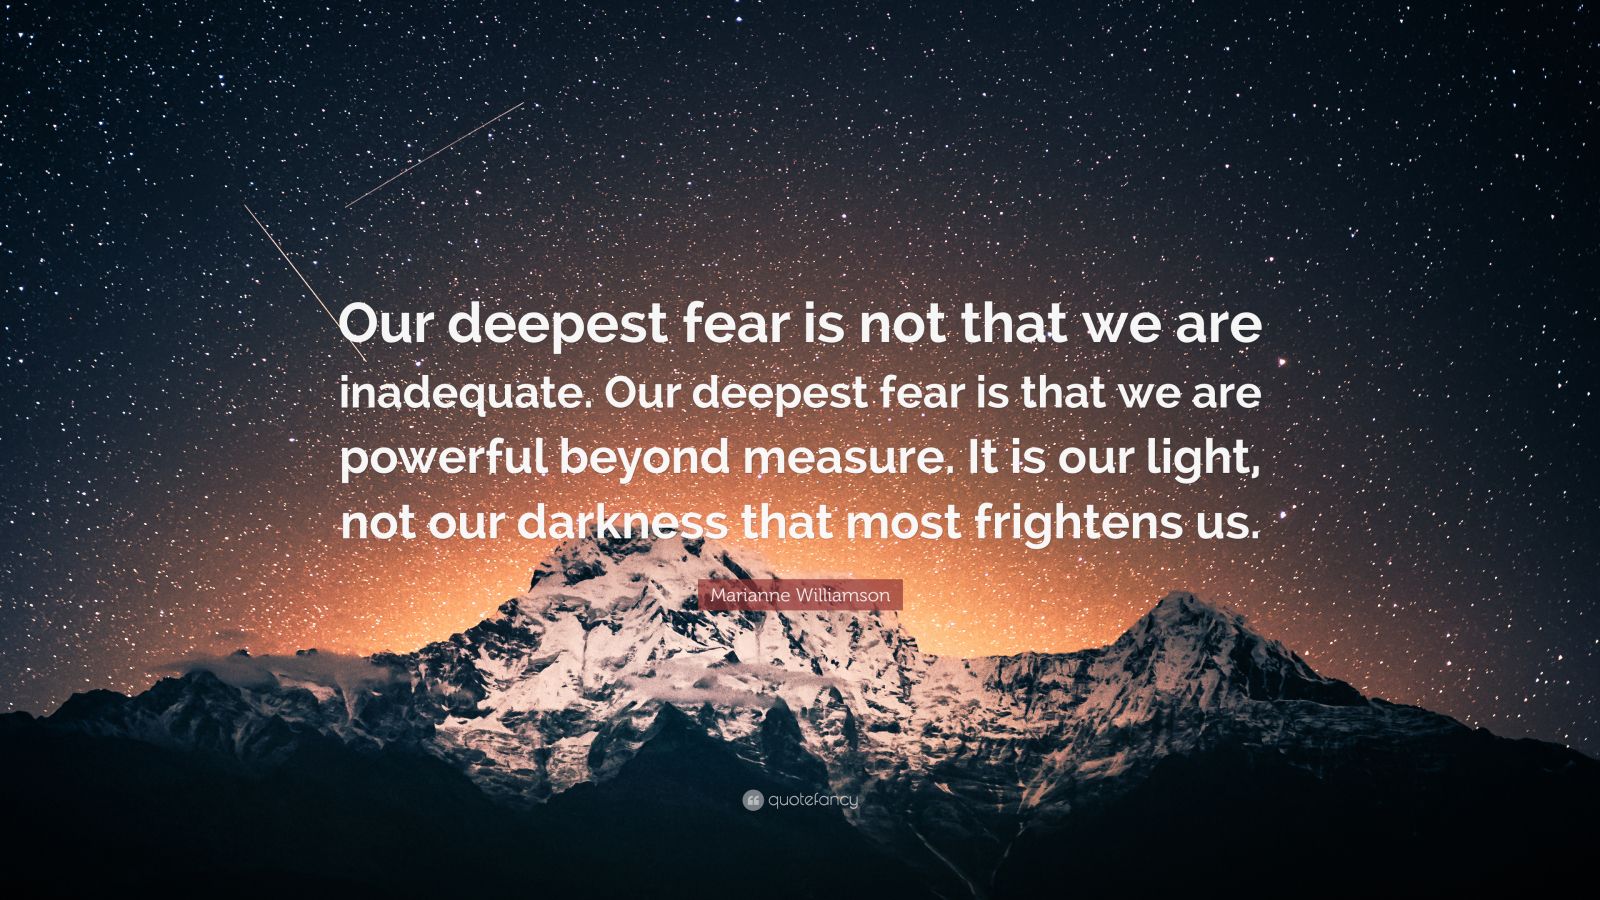 marianne-williamson-quote-our-deepest-fear-is-not-that-we-are